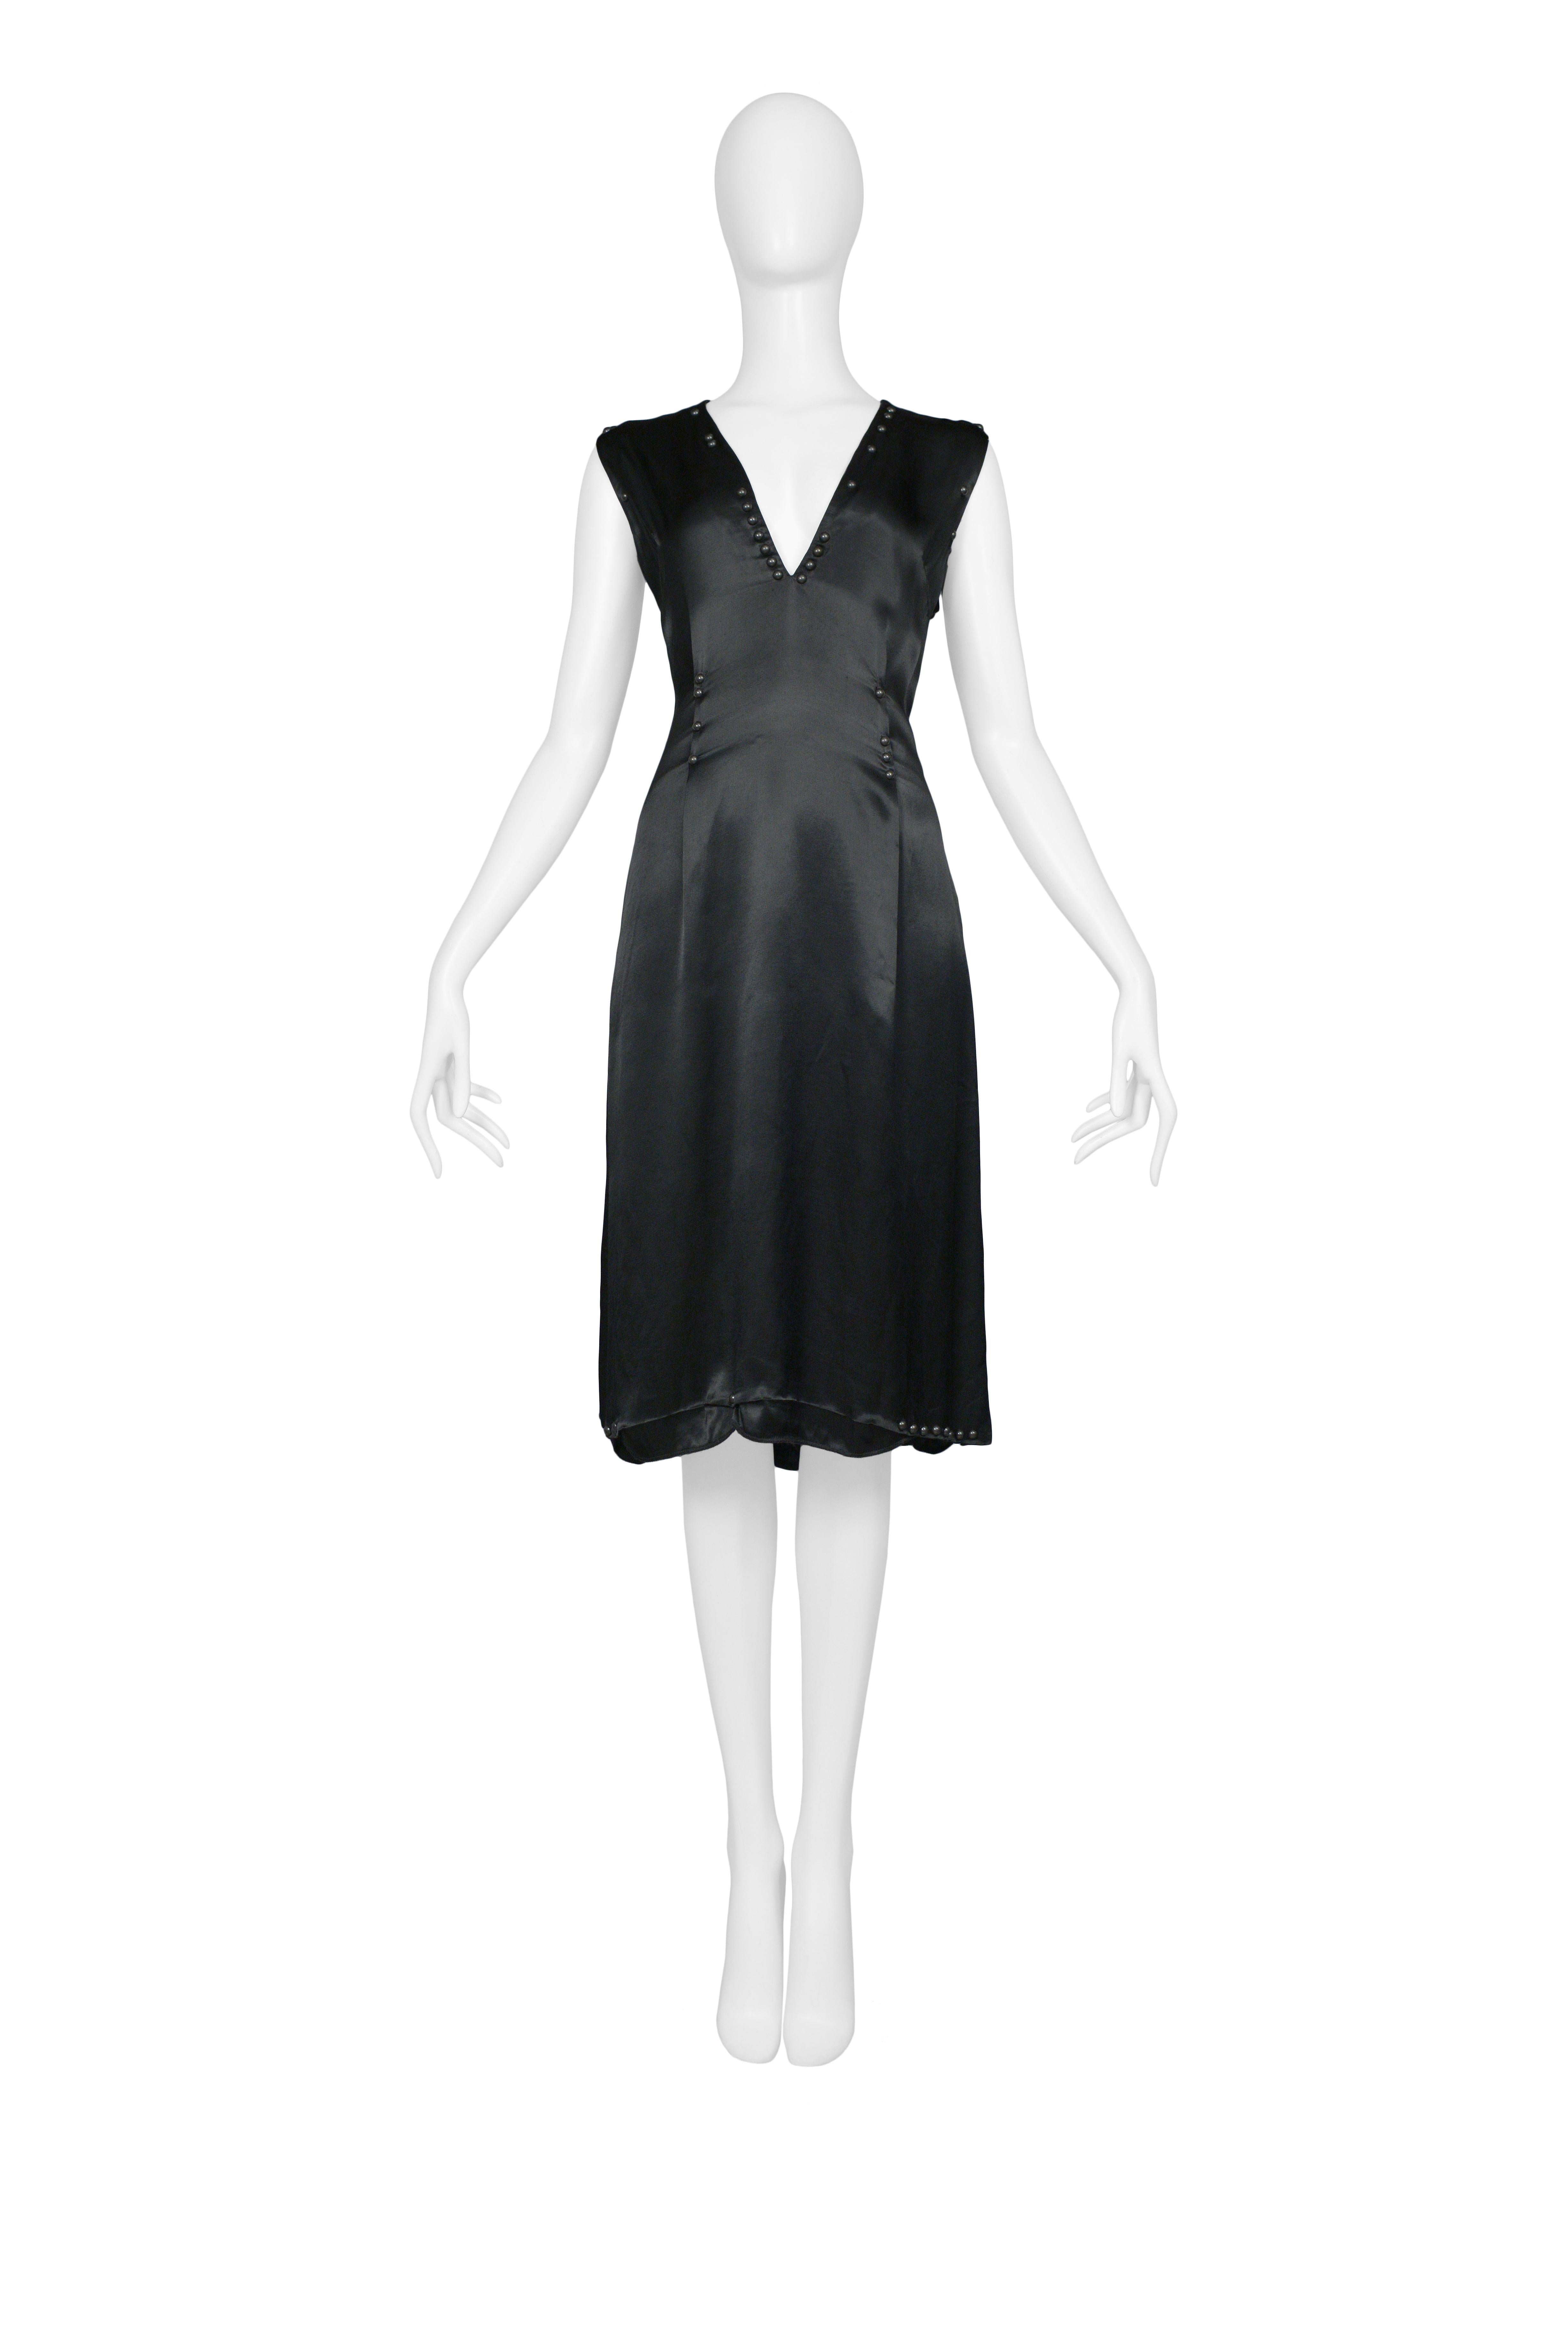 Resurrection Vintage is excited to offer a vintage Maison Martin Margiela black satin dress with a v neckline that is decorated with studs, an unlet hem with studs, and inspired by car seat covers from the infamous car seat collection. Made in